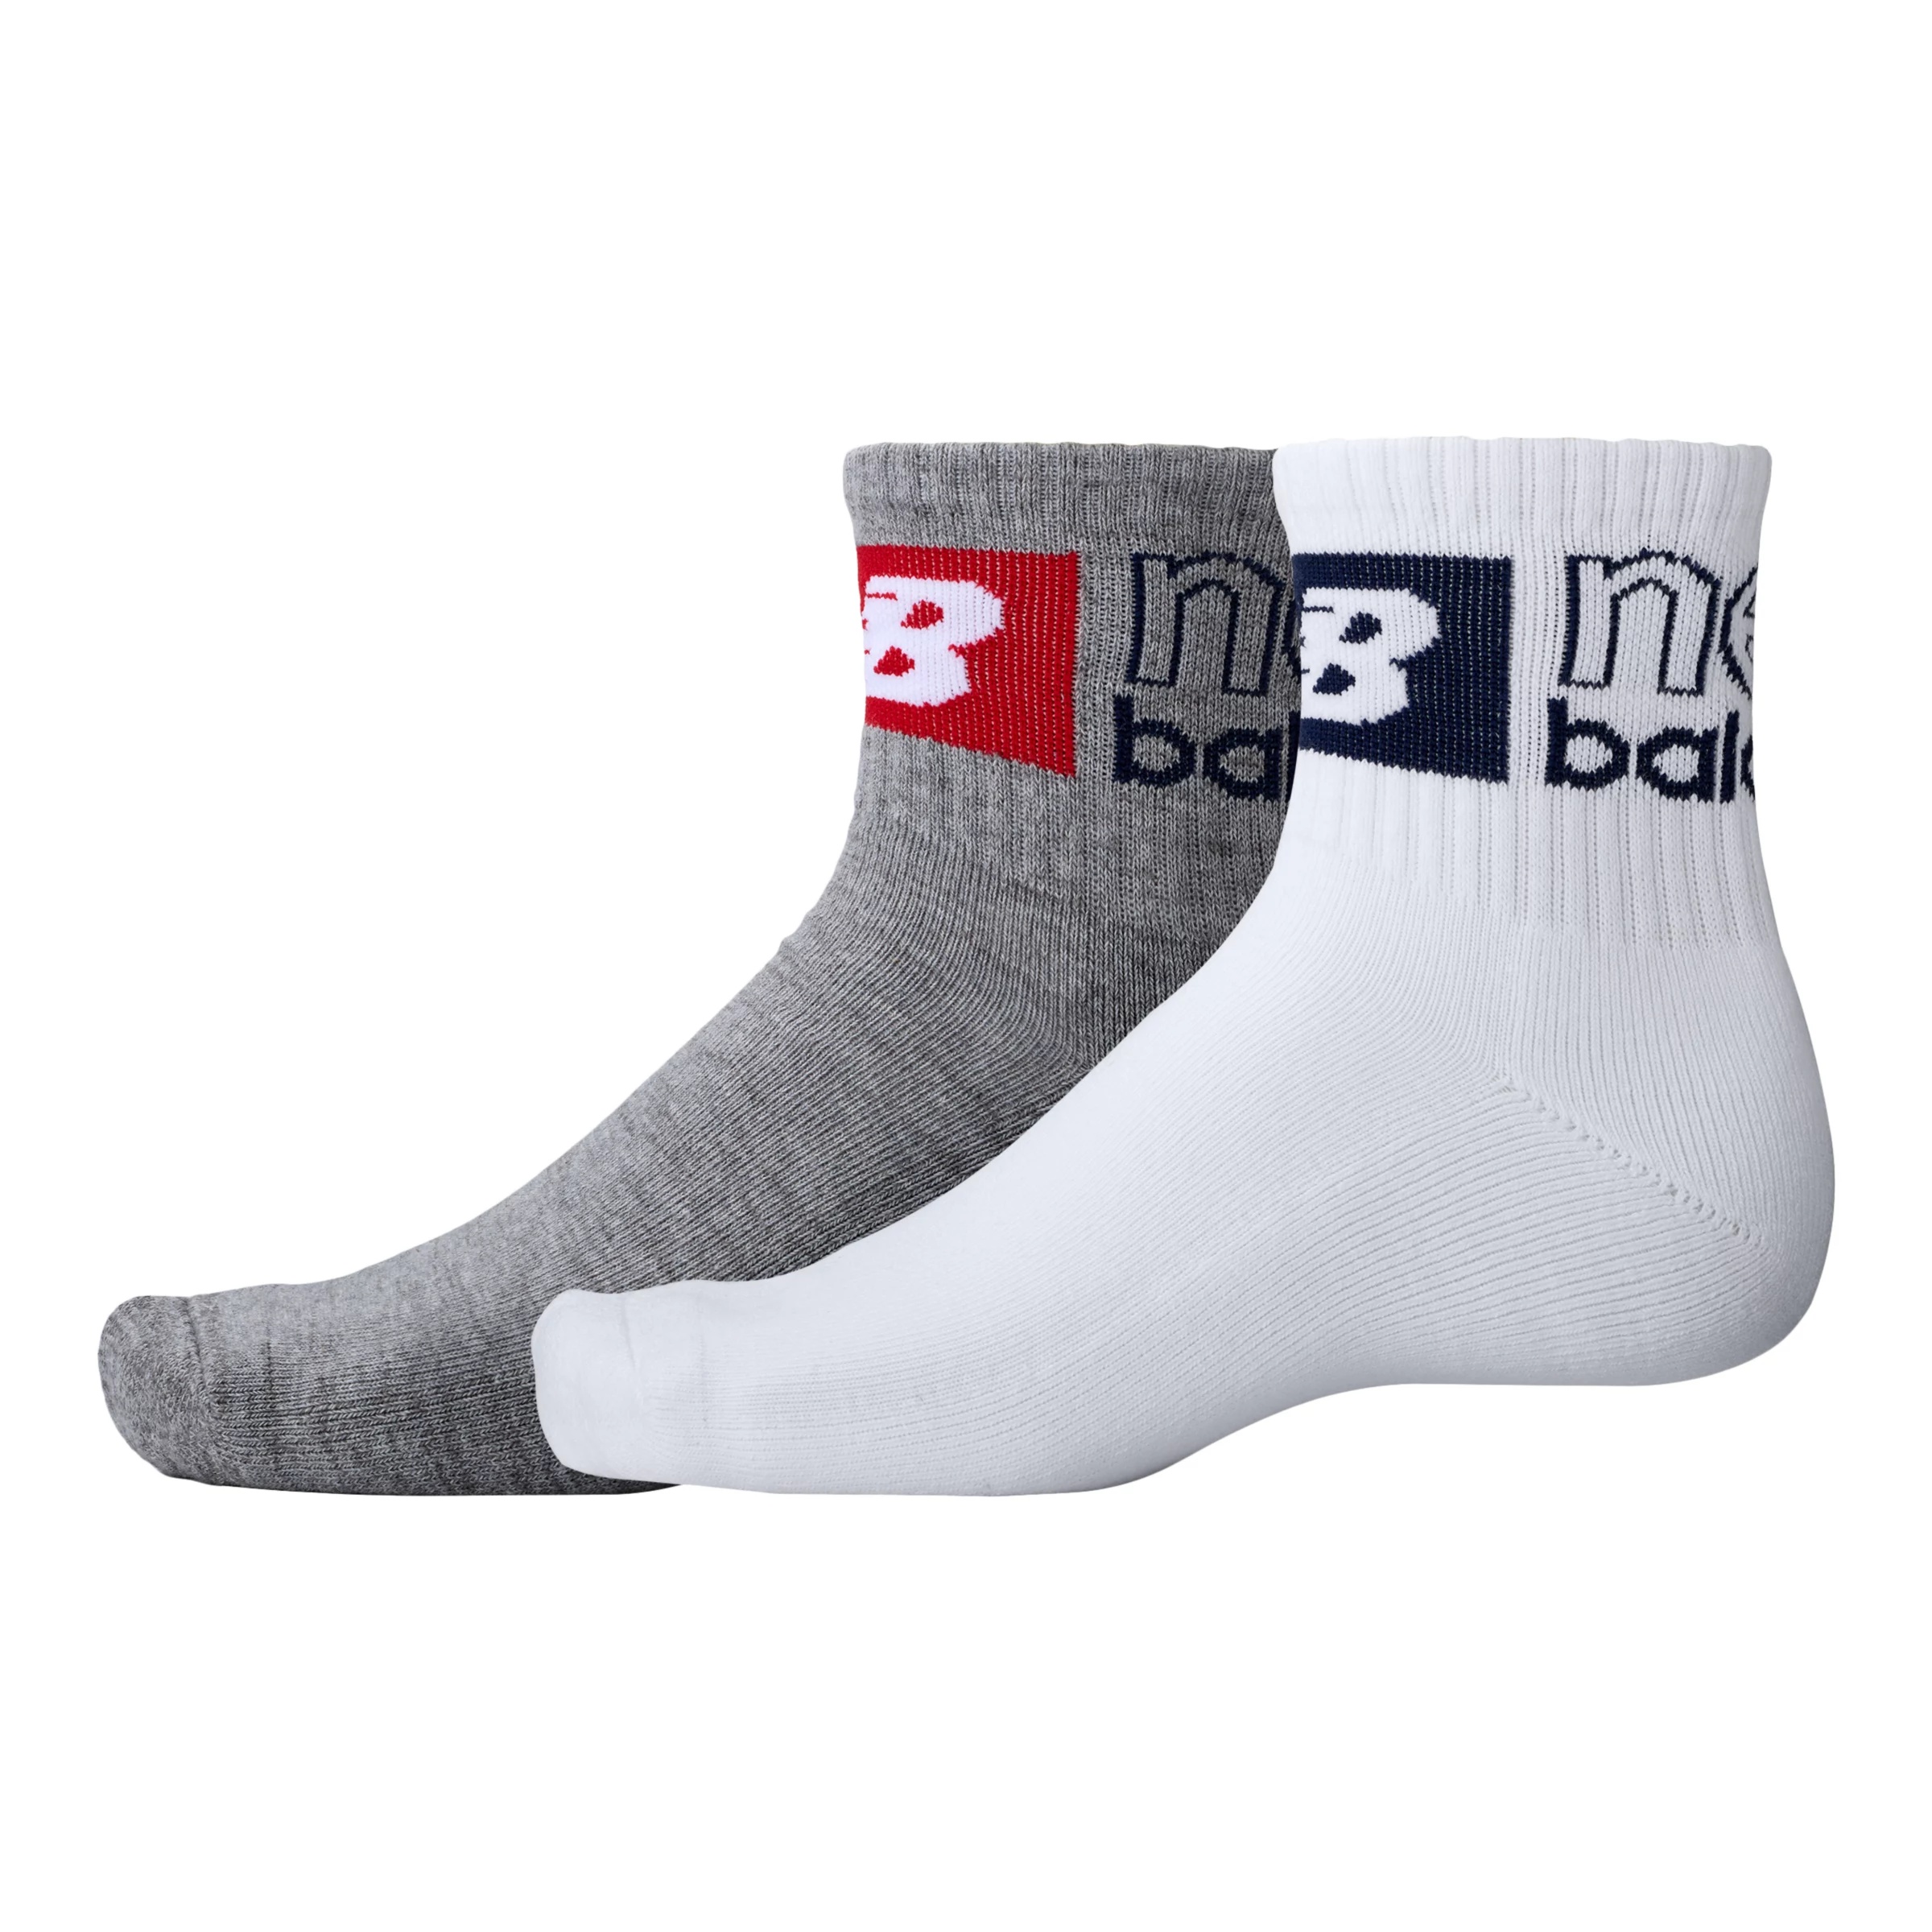 Sports Essentials Ankle Socks 2 Pack - 1